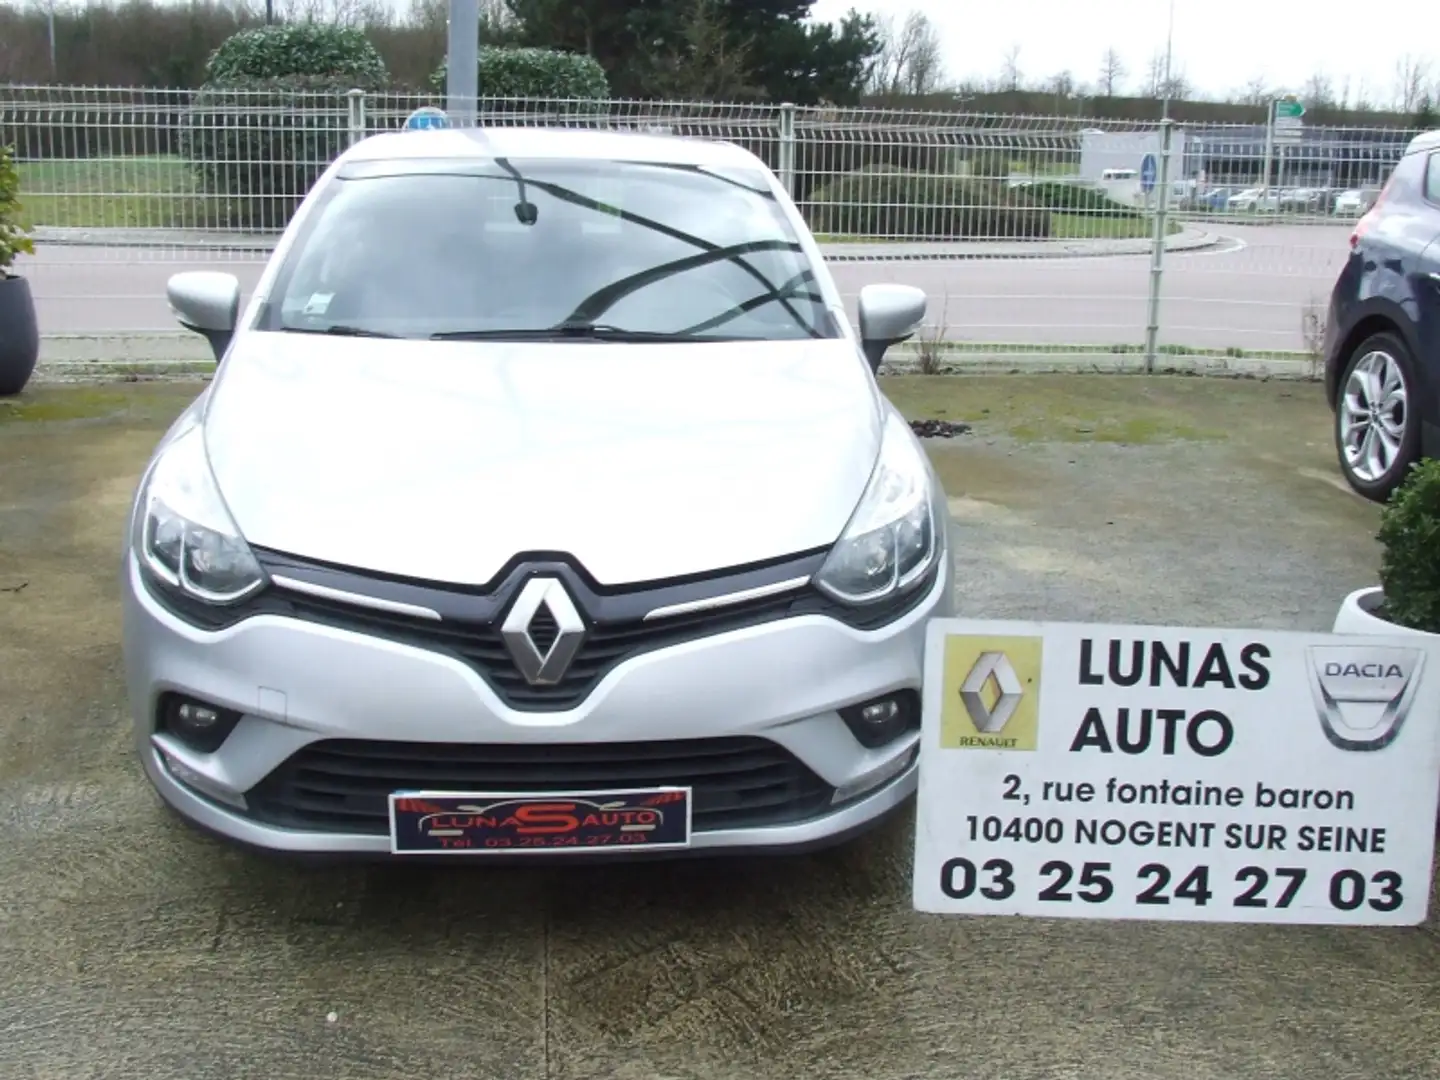 Renault Clio 1.5 dCi 90ch energy Business 82g 5p - 1